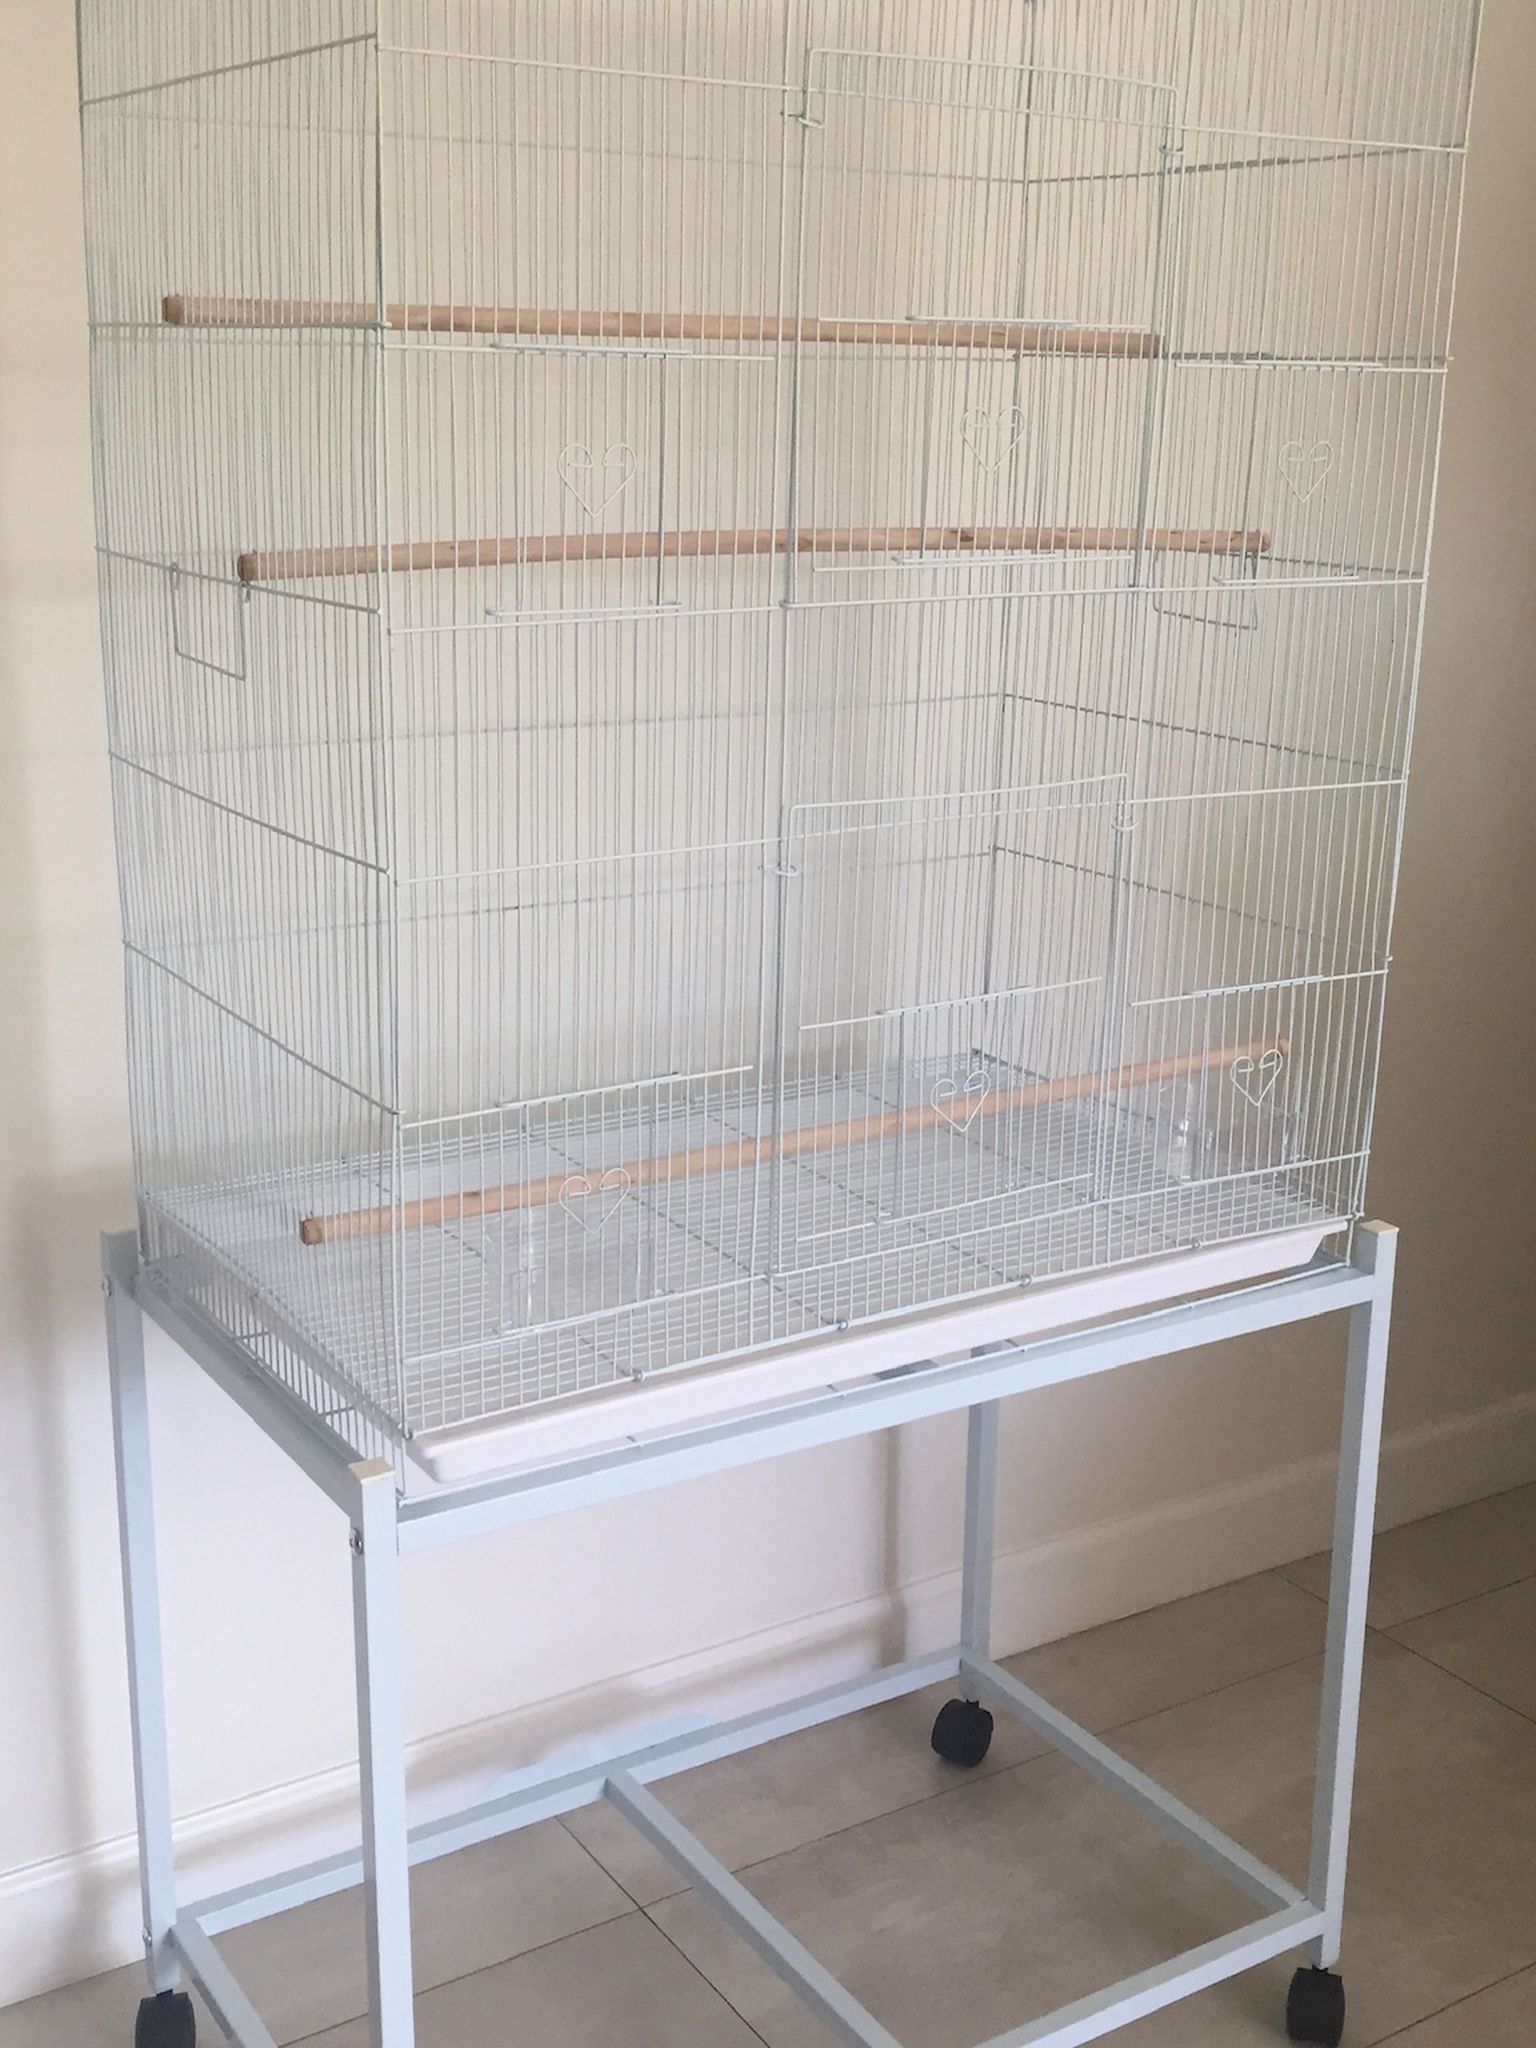 Large Flight Bird Cage With Stand On Wheels BRAND NEW